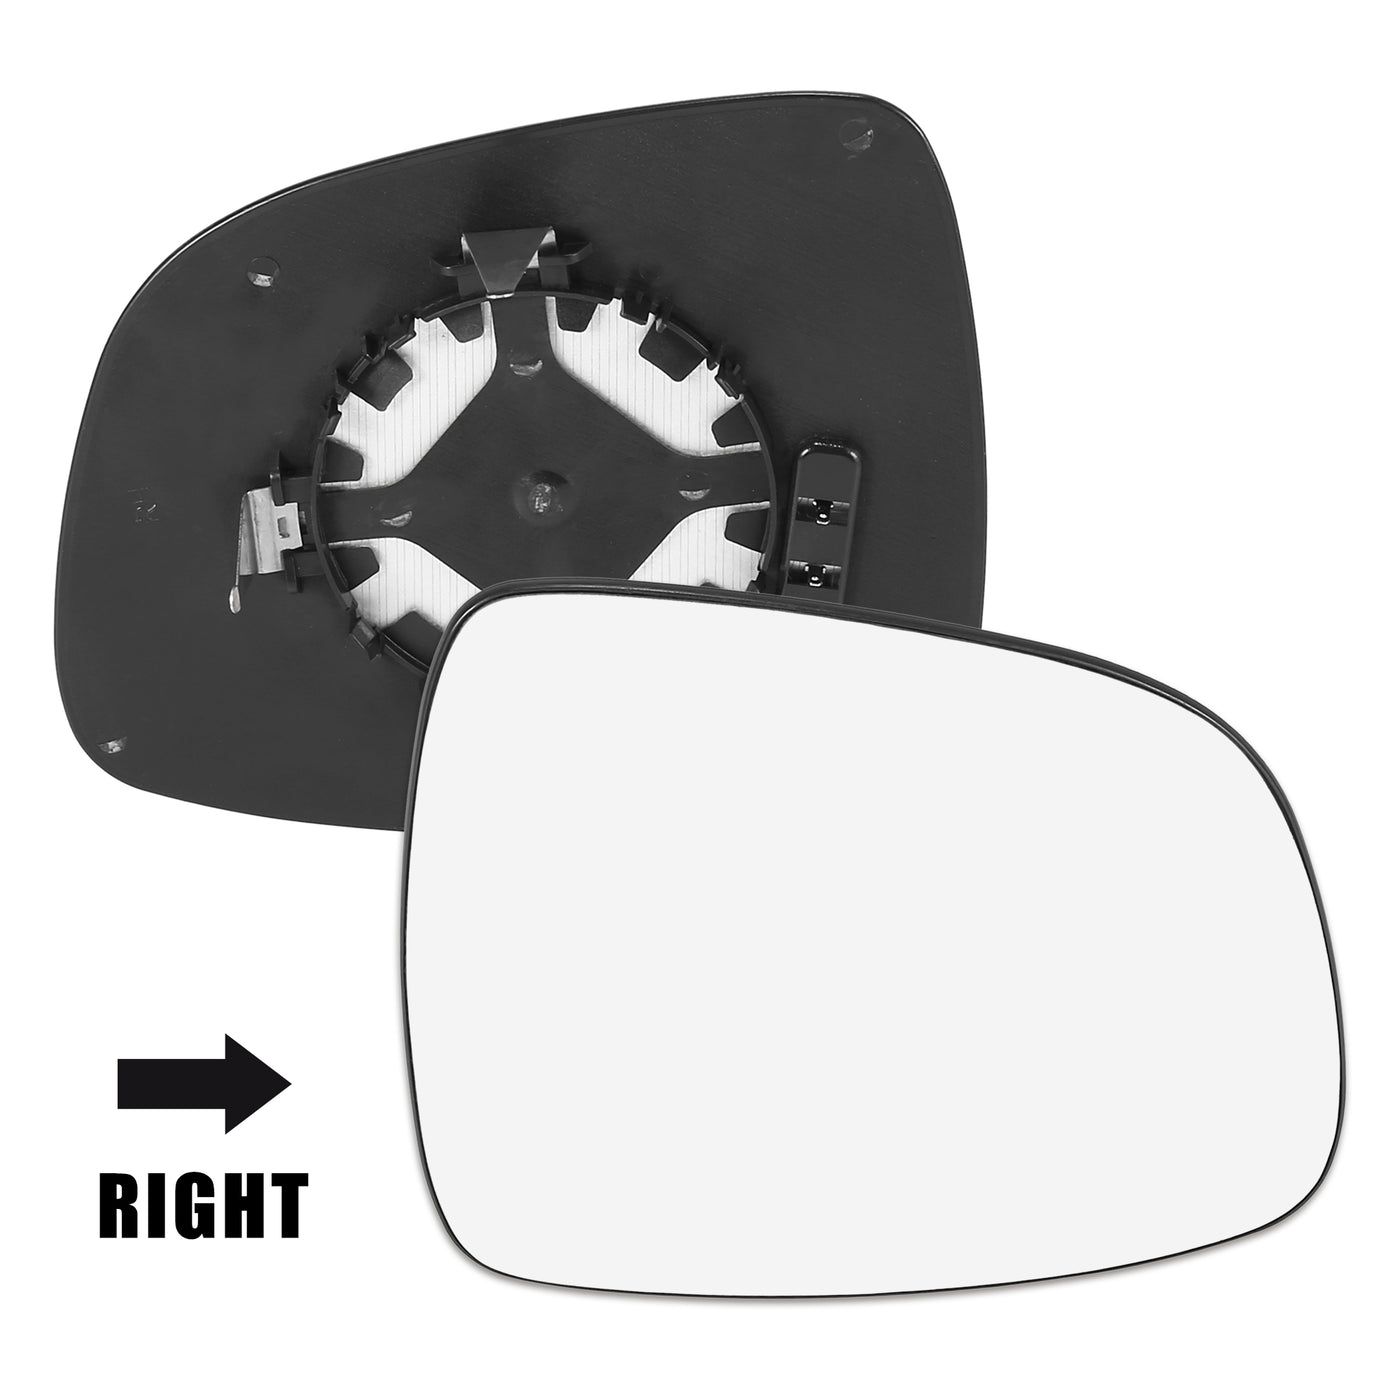 X AUTOHAUX Car Rearview Right Side Heated Mirror Glass with Backing Plate 71743611 for Suzuki SX4 2006-2017